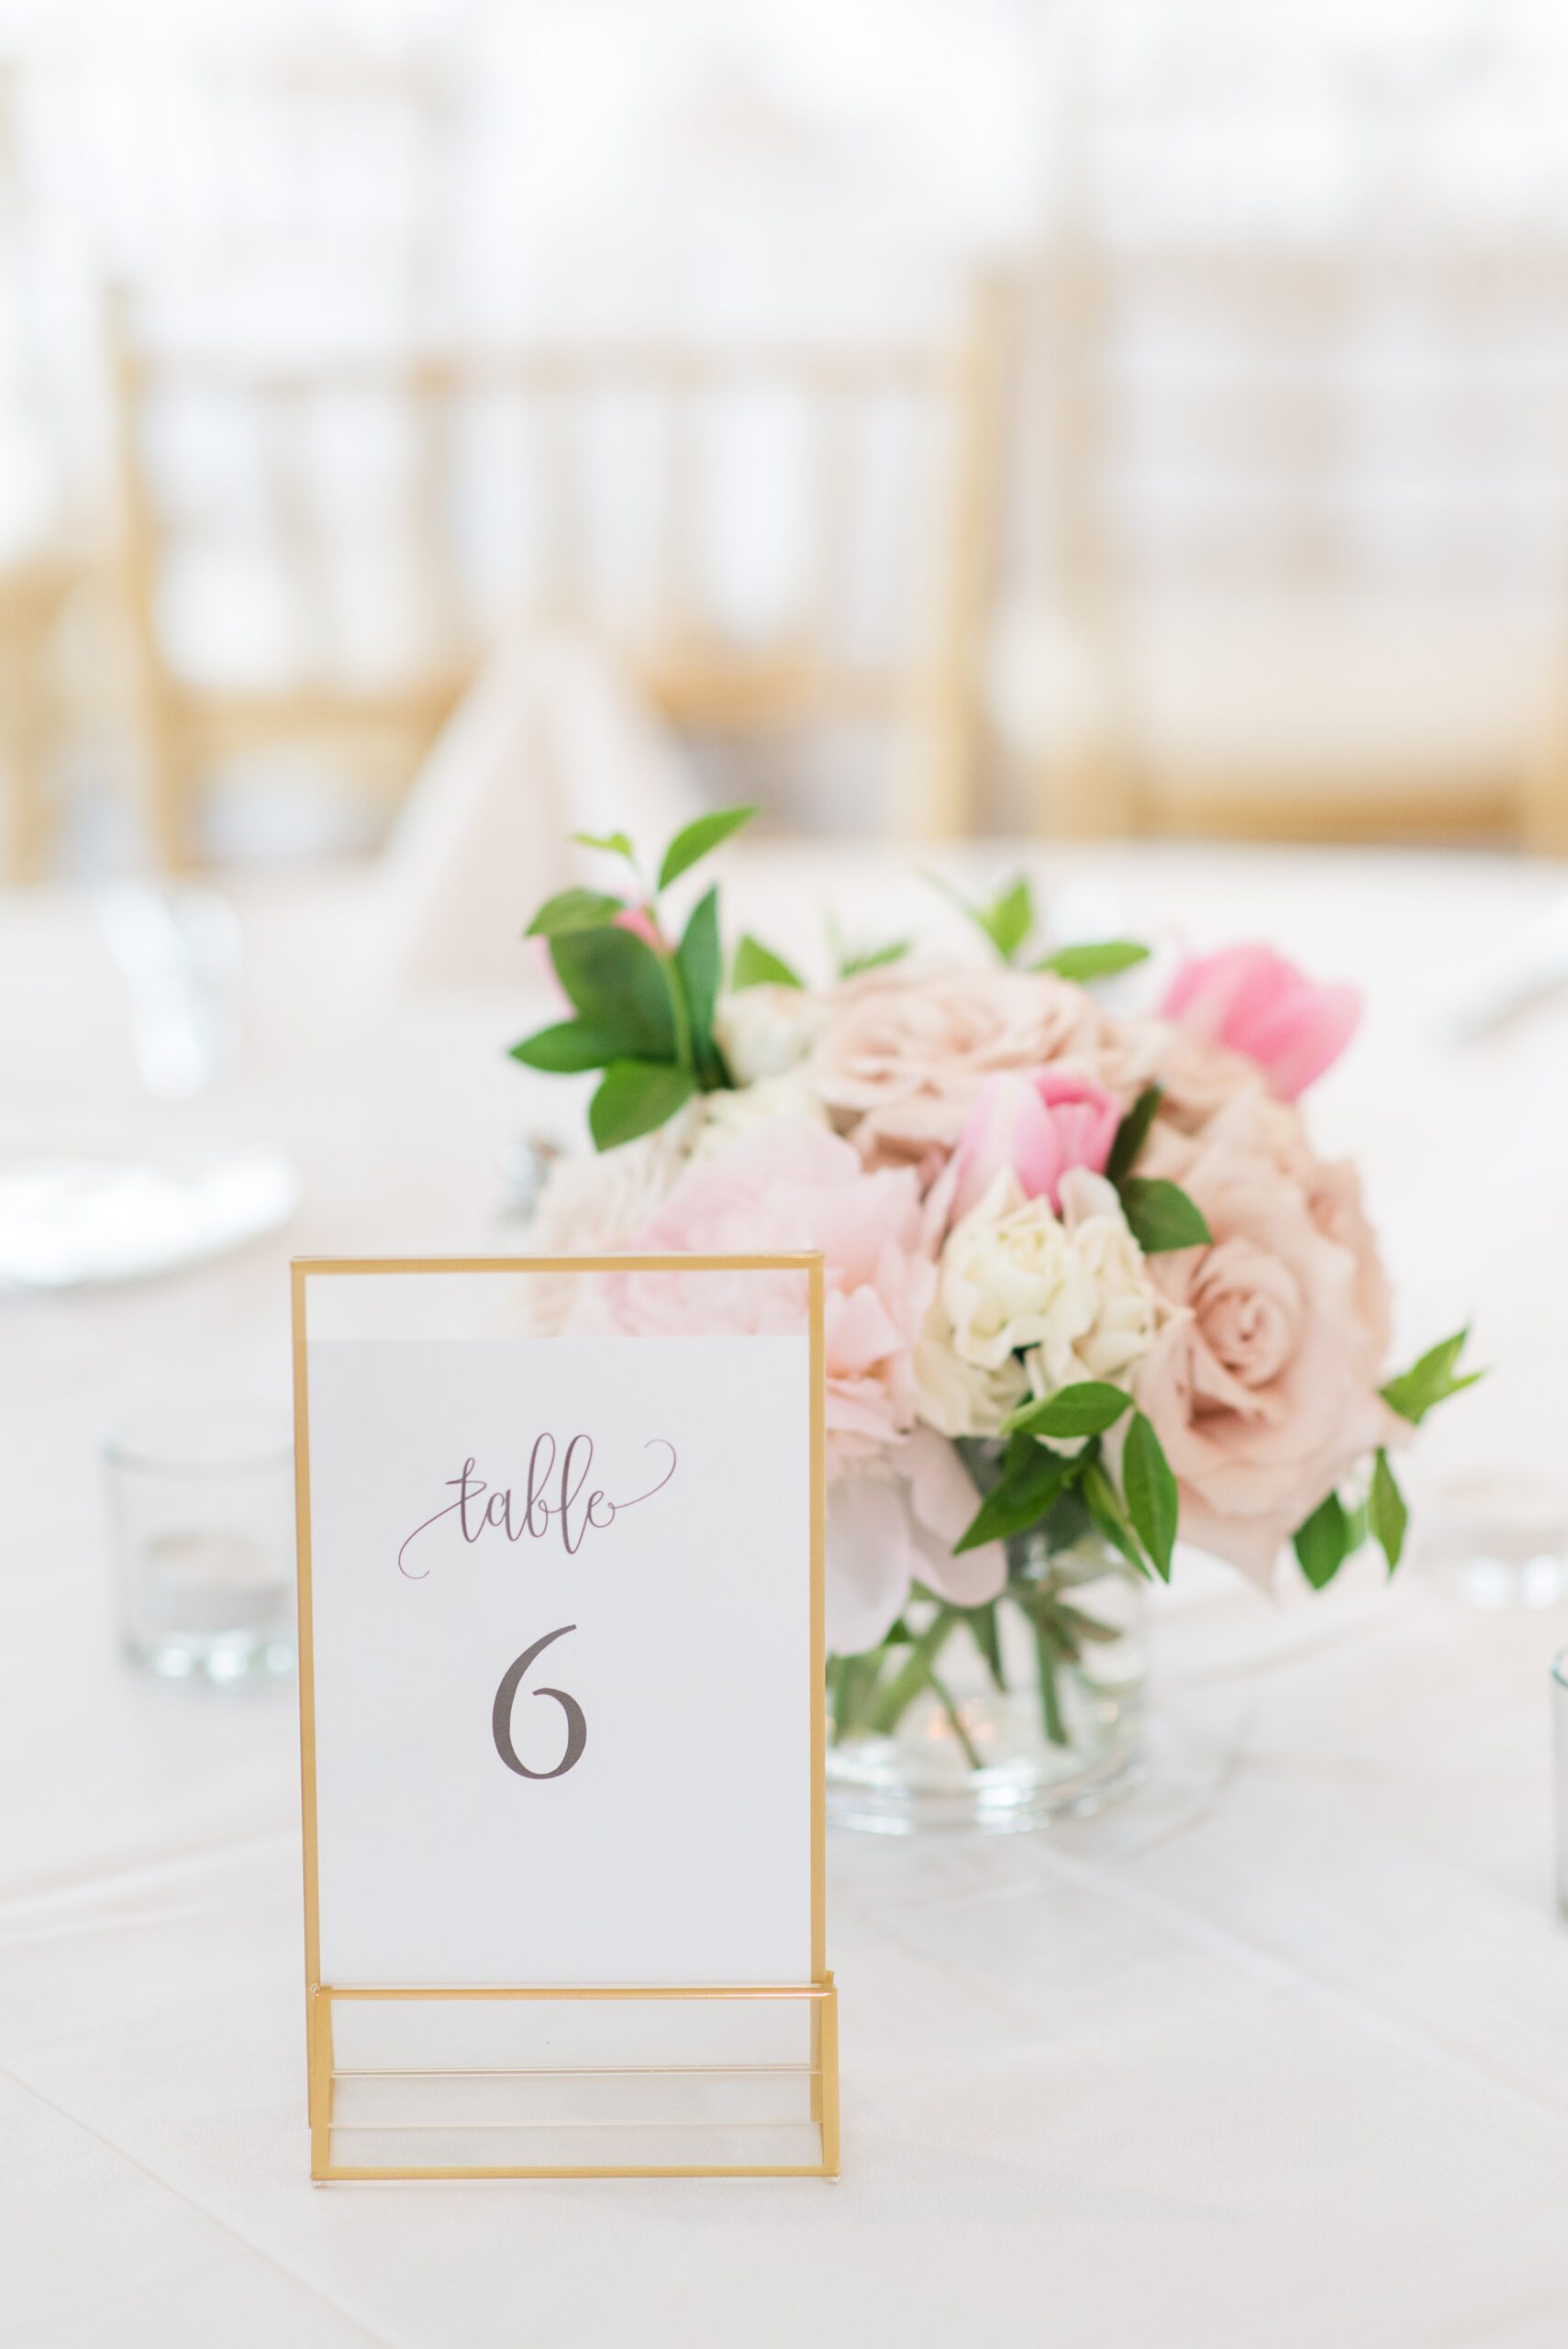 Details of a table setting with pink florals